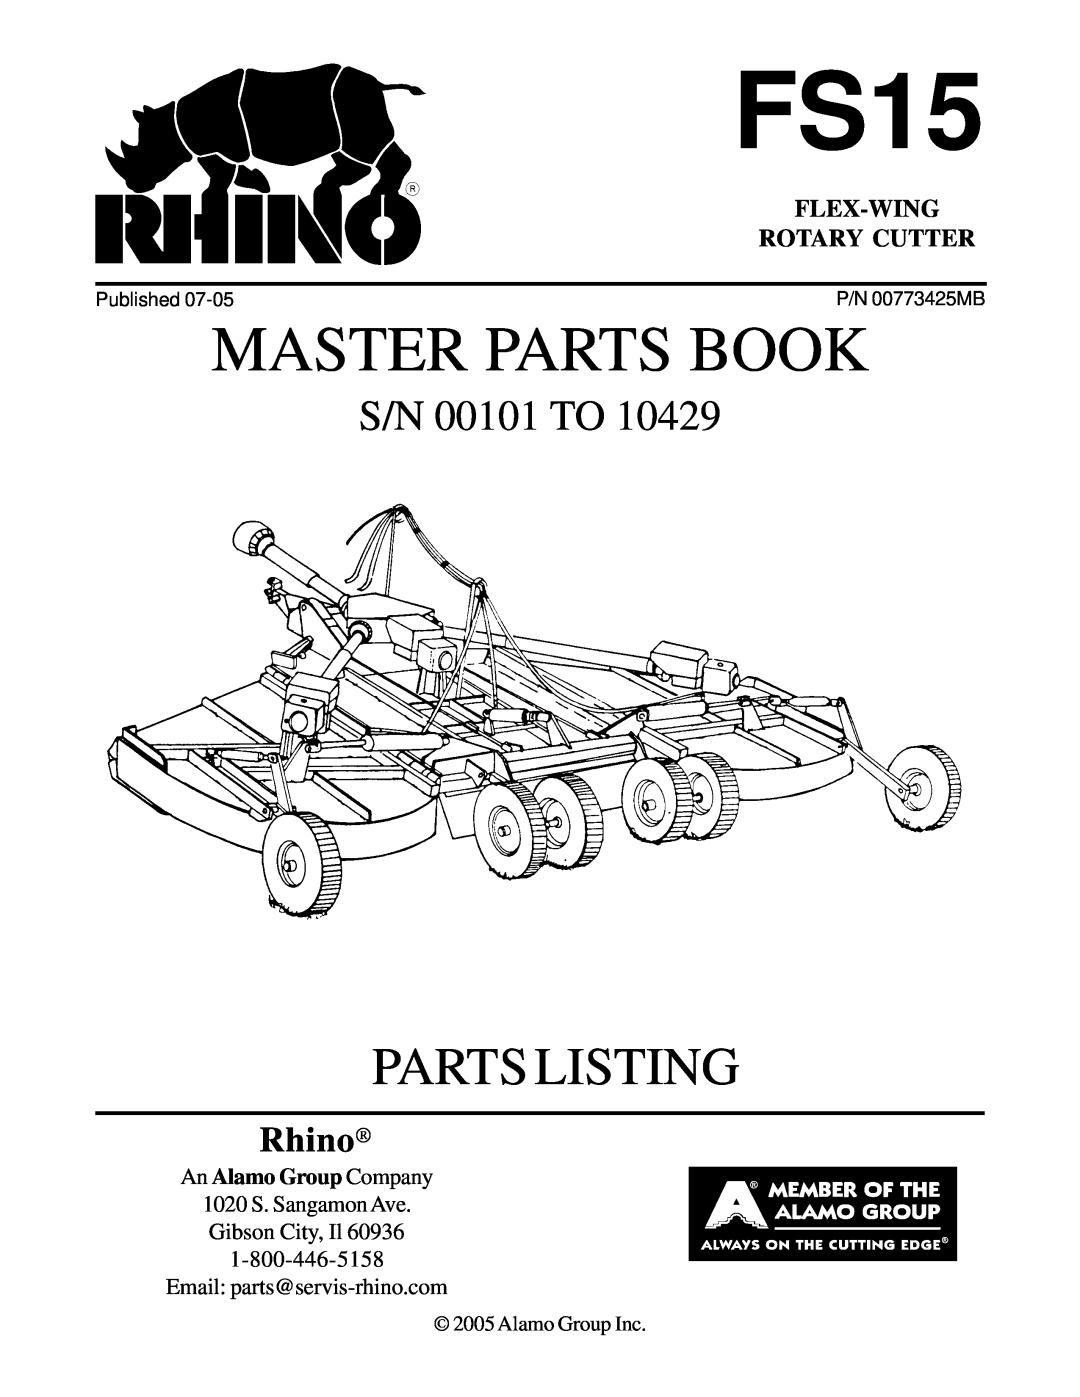 Servis-Rhino FS15 manual Master Parts Book, Parts Listing, S/N 00101 TO, Rhino, Flex-Wing, Rotary Cutter, Alamo Group Inc 